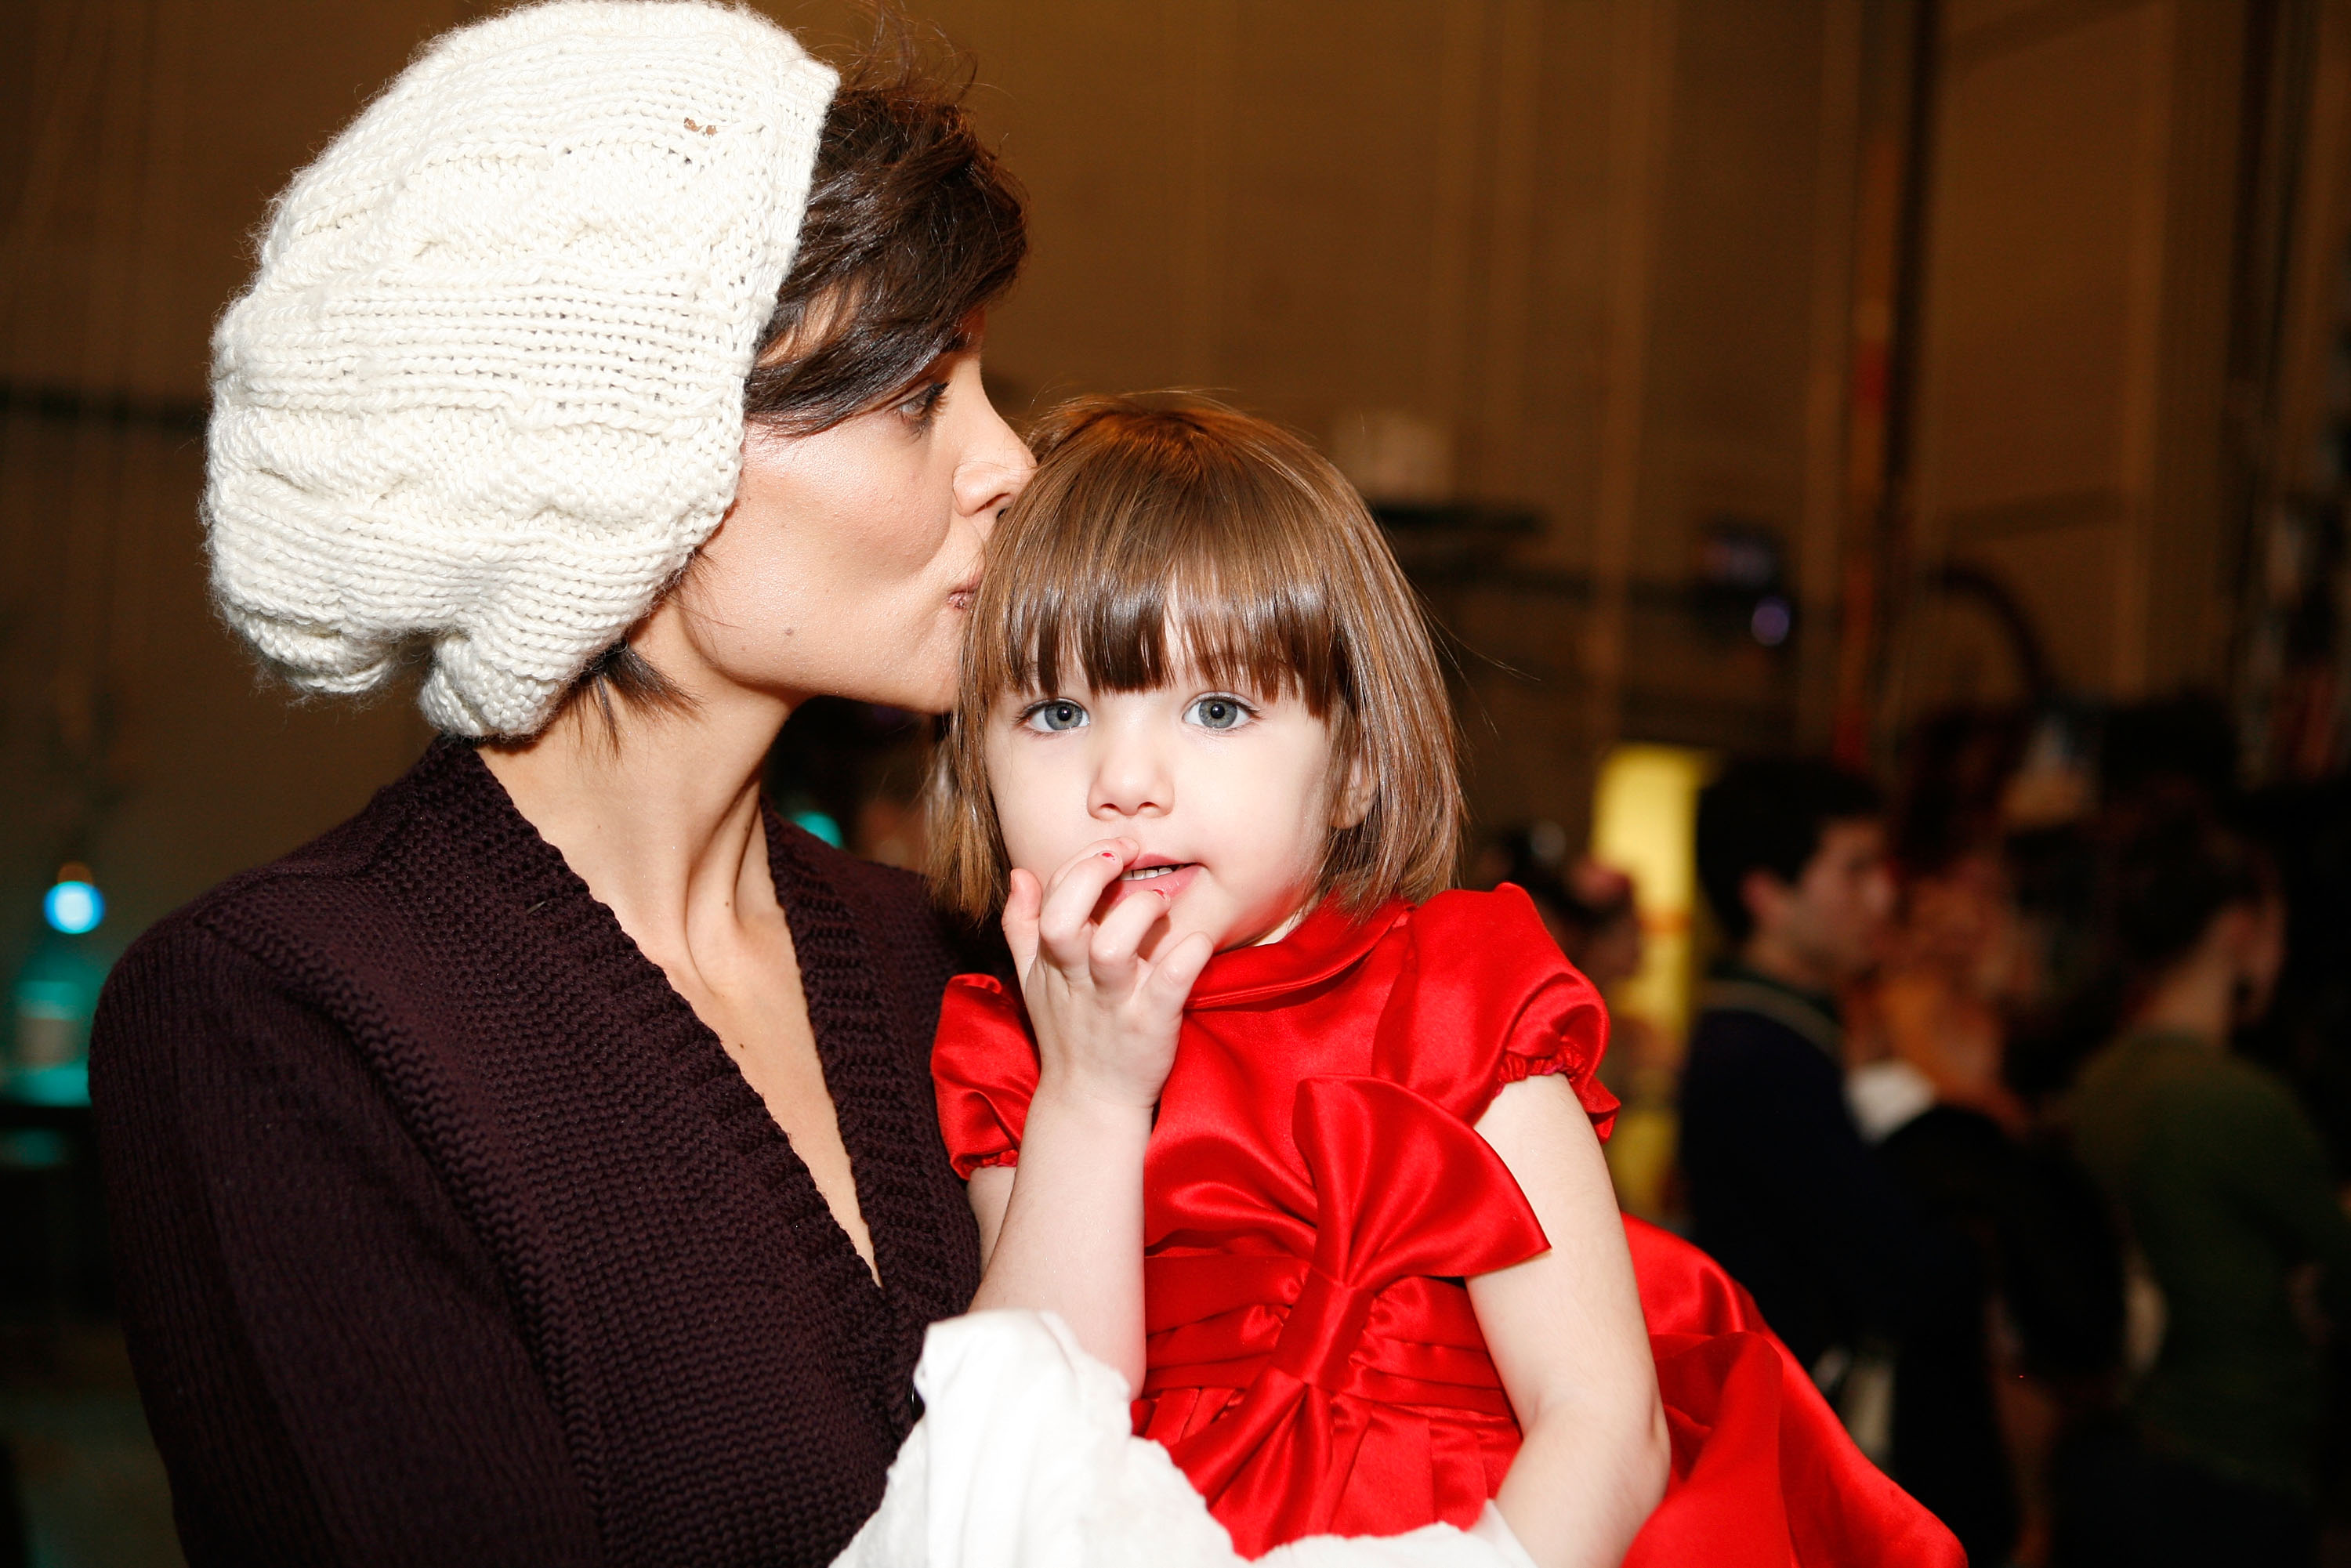 Katie Holmes and Suri Cruise at "The Nutcracker" in New York City on December 14, 2008 | Source: Getty Images